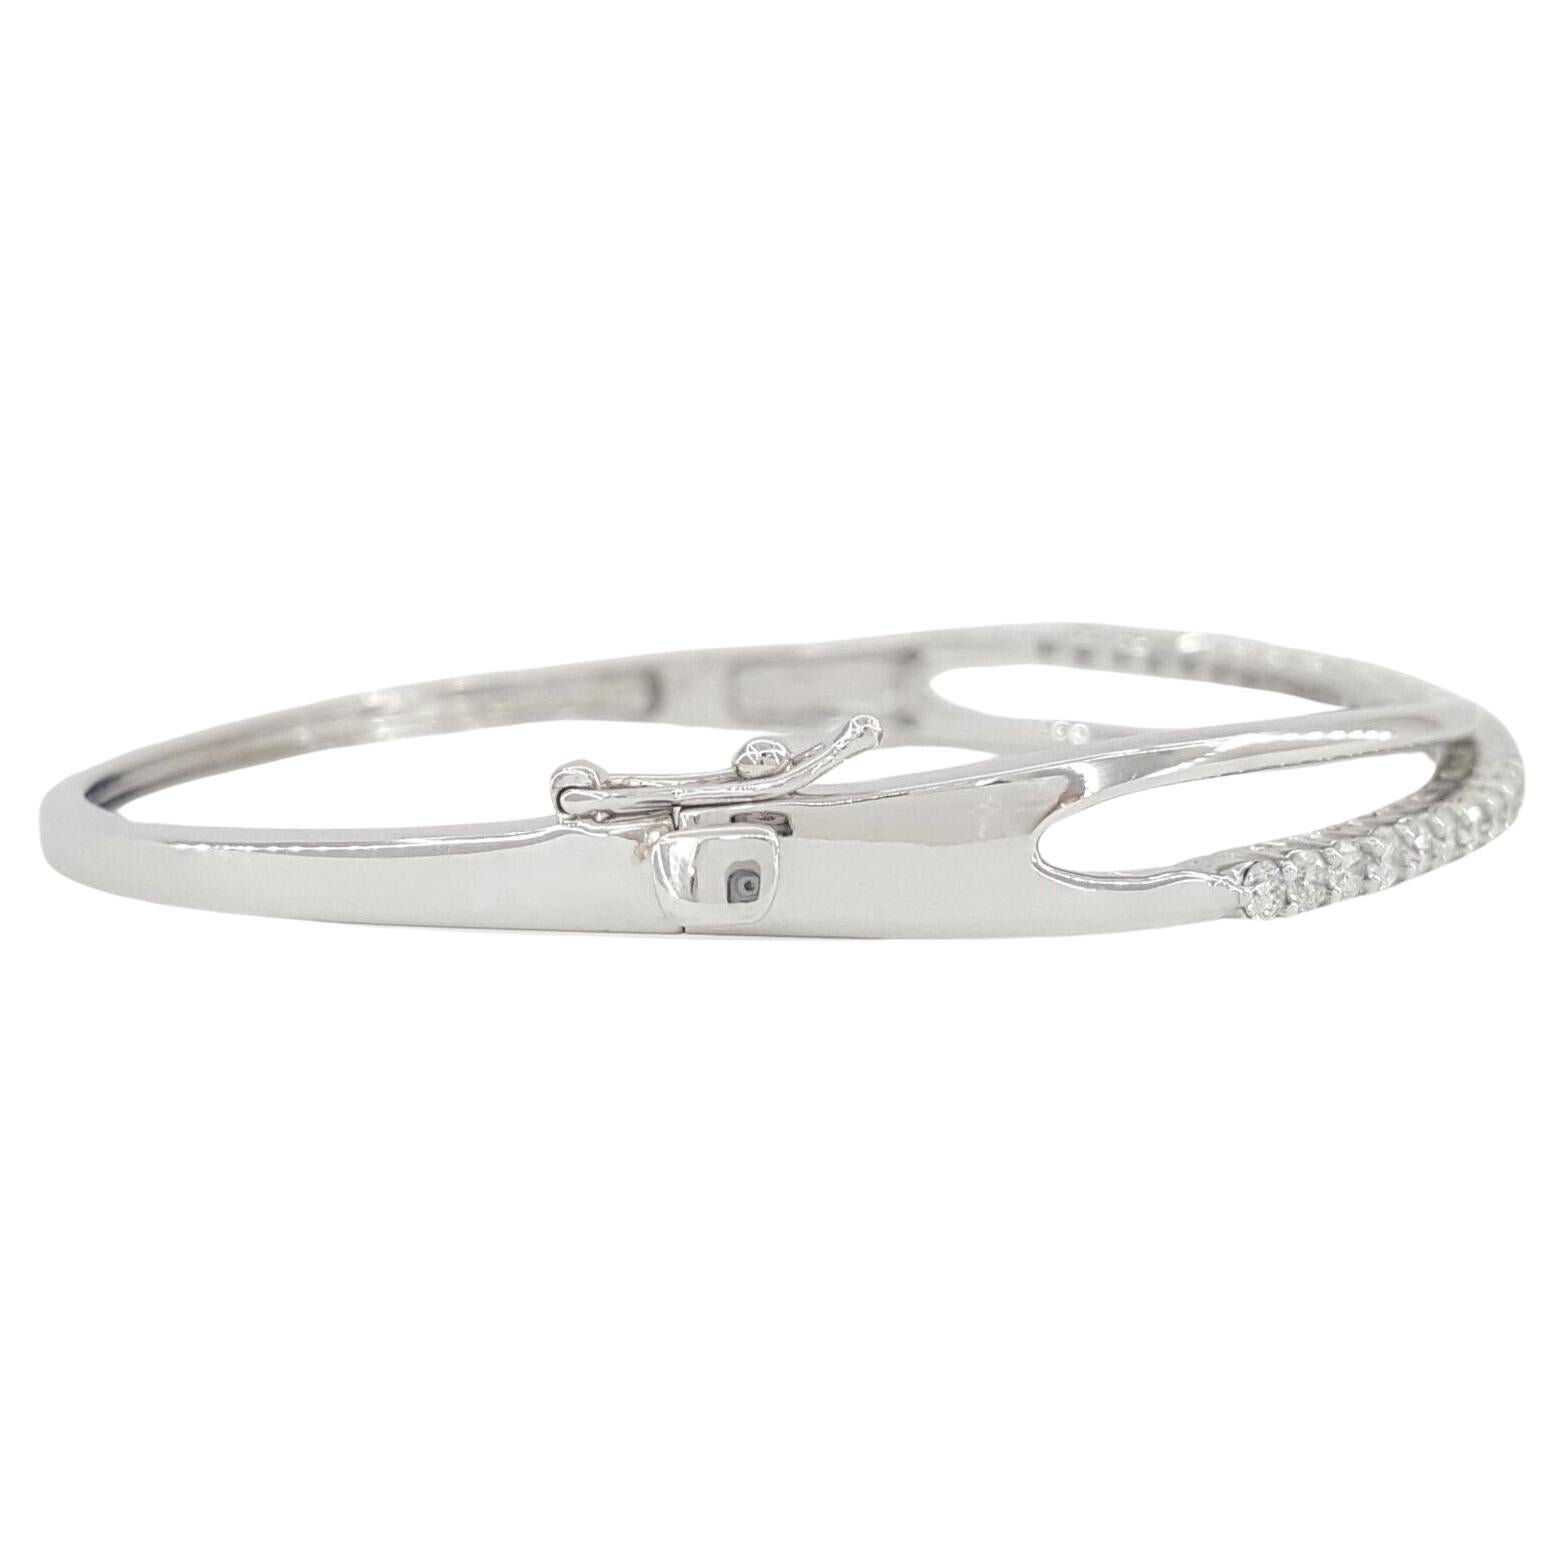 1ct total weight Round Brilliant Cut Diamond 14k White Gold Bangle Bracelet. 

The bracelet weighs 12.2 grams, 7 inches in length, 6mm wide, 3.3 mm thick, there are 31 natural Round Brilliant Cut diamonds weighing approximately 1 ct total weight,